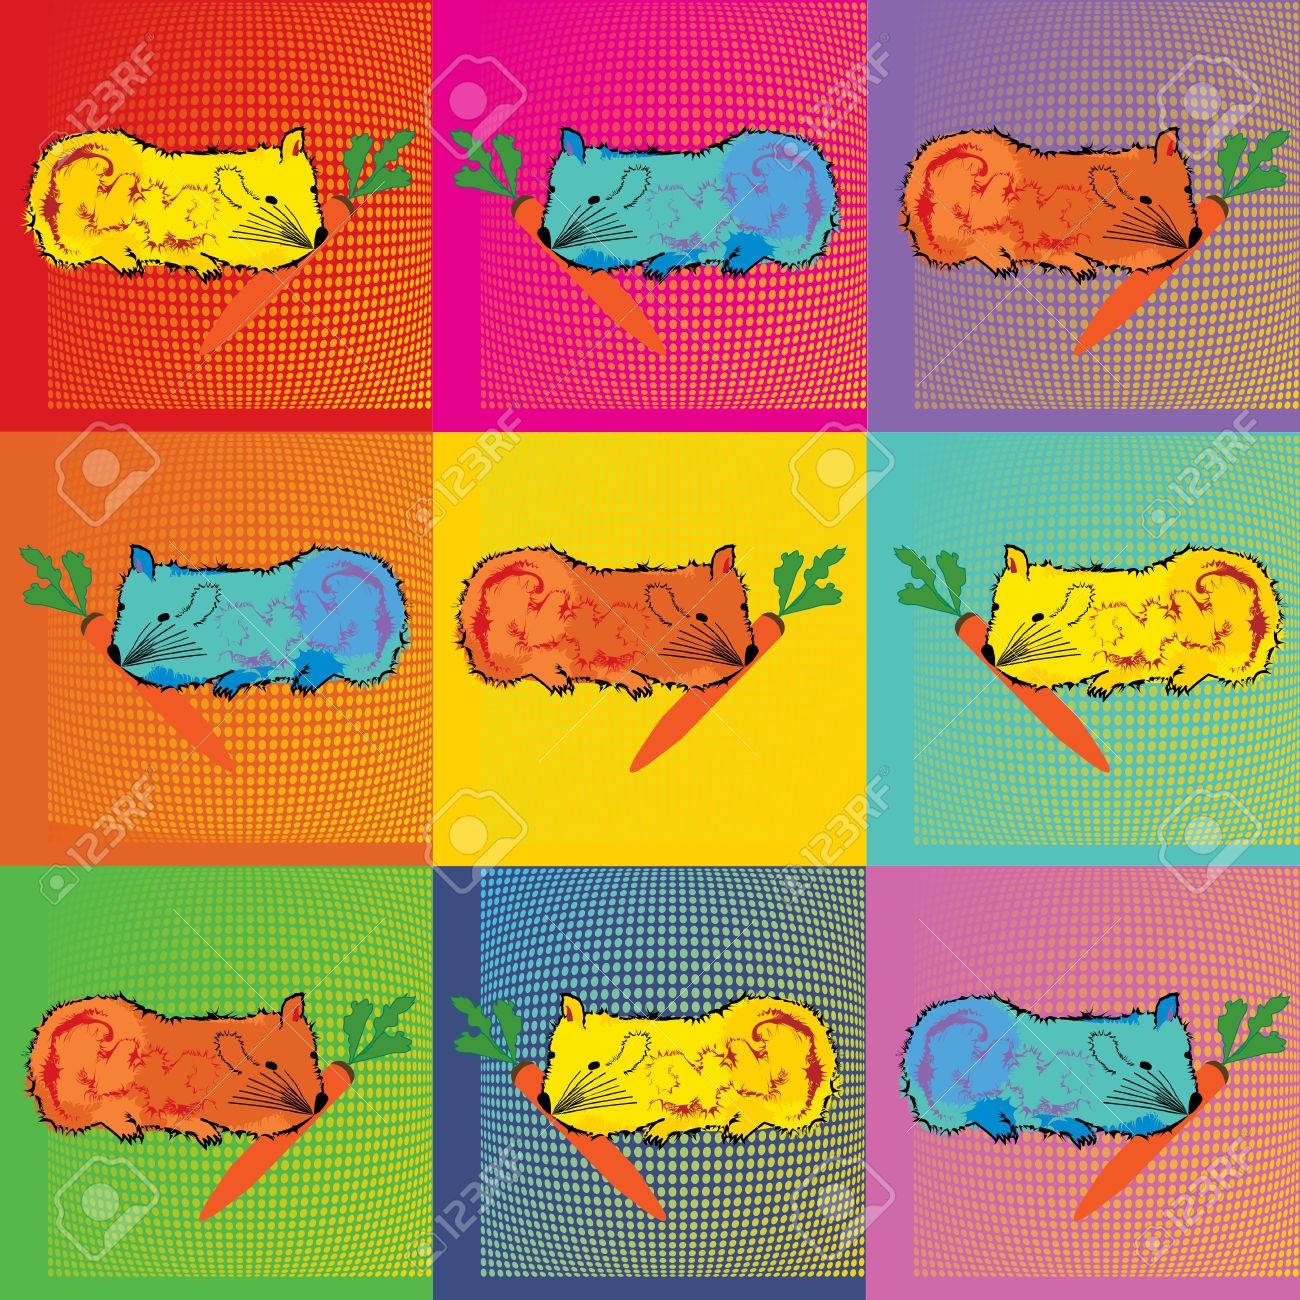 Pop Art Andy Warhol Background Illustration With Dots Royalty